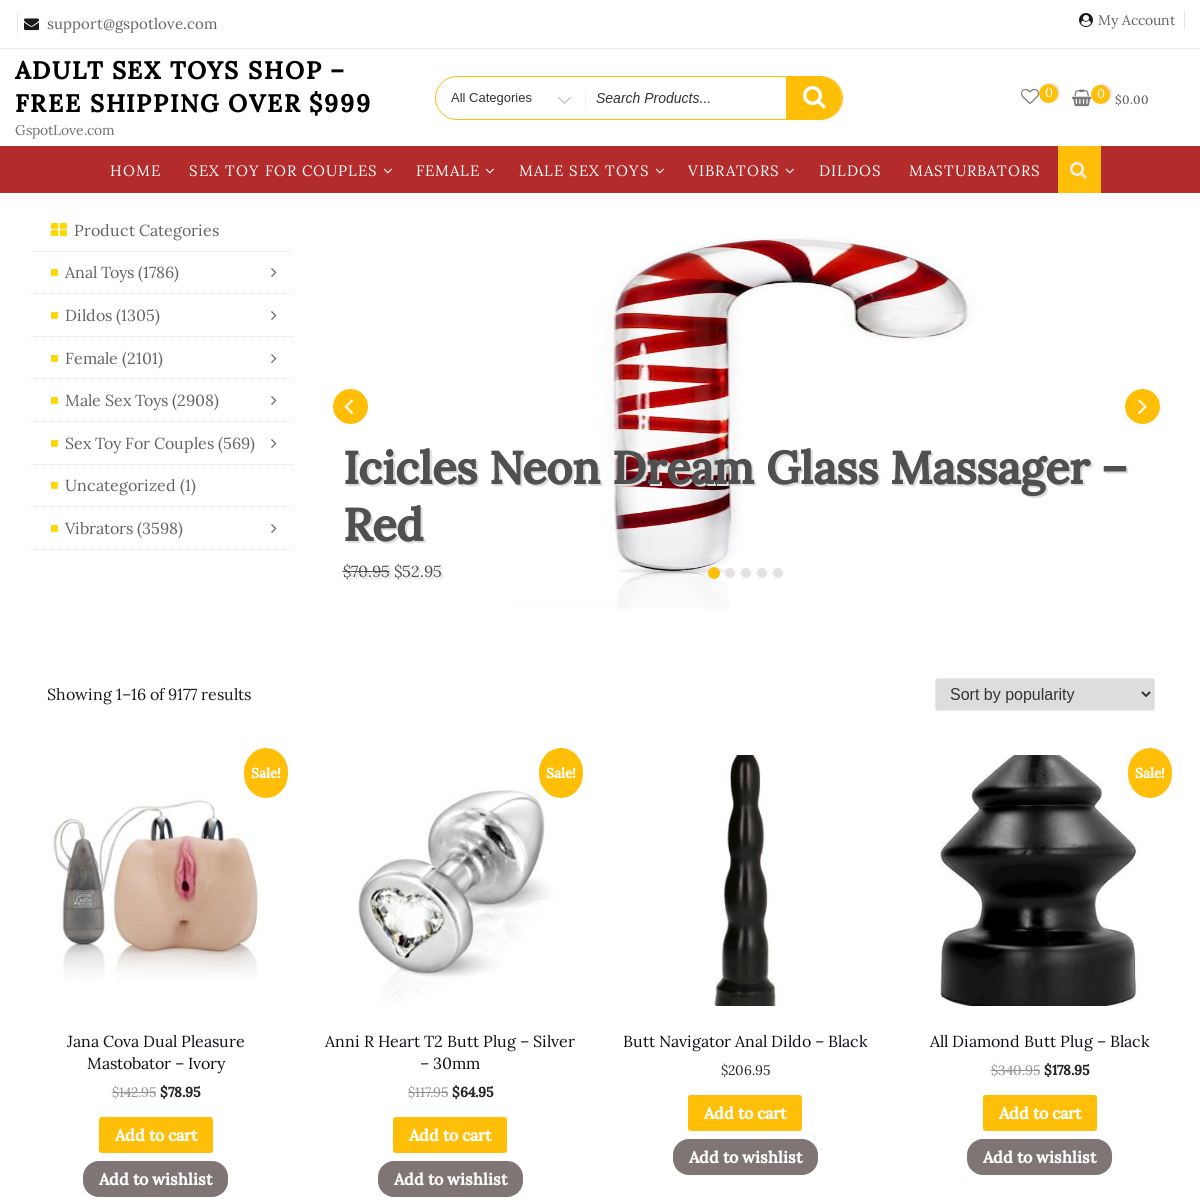 Adult Sex Toys Shop â€“ Free Shipping over $999 â€“ GspotLove.com